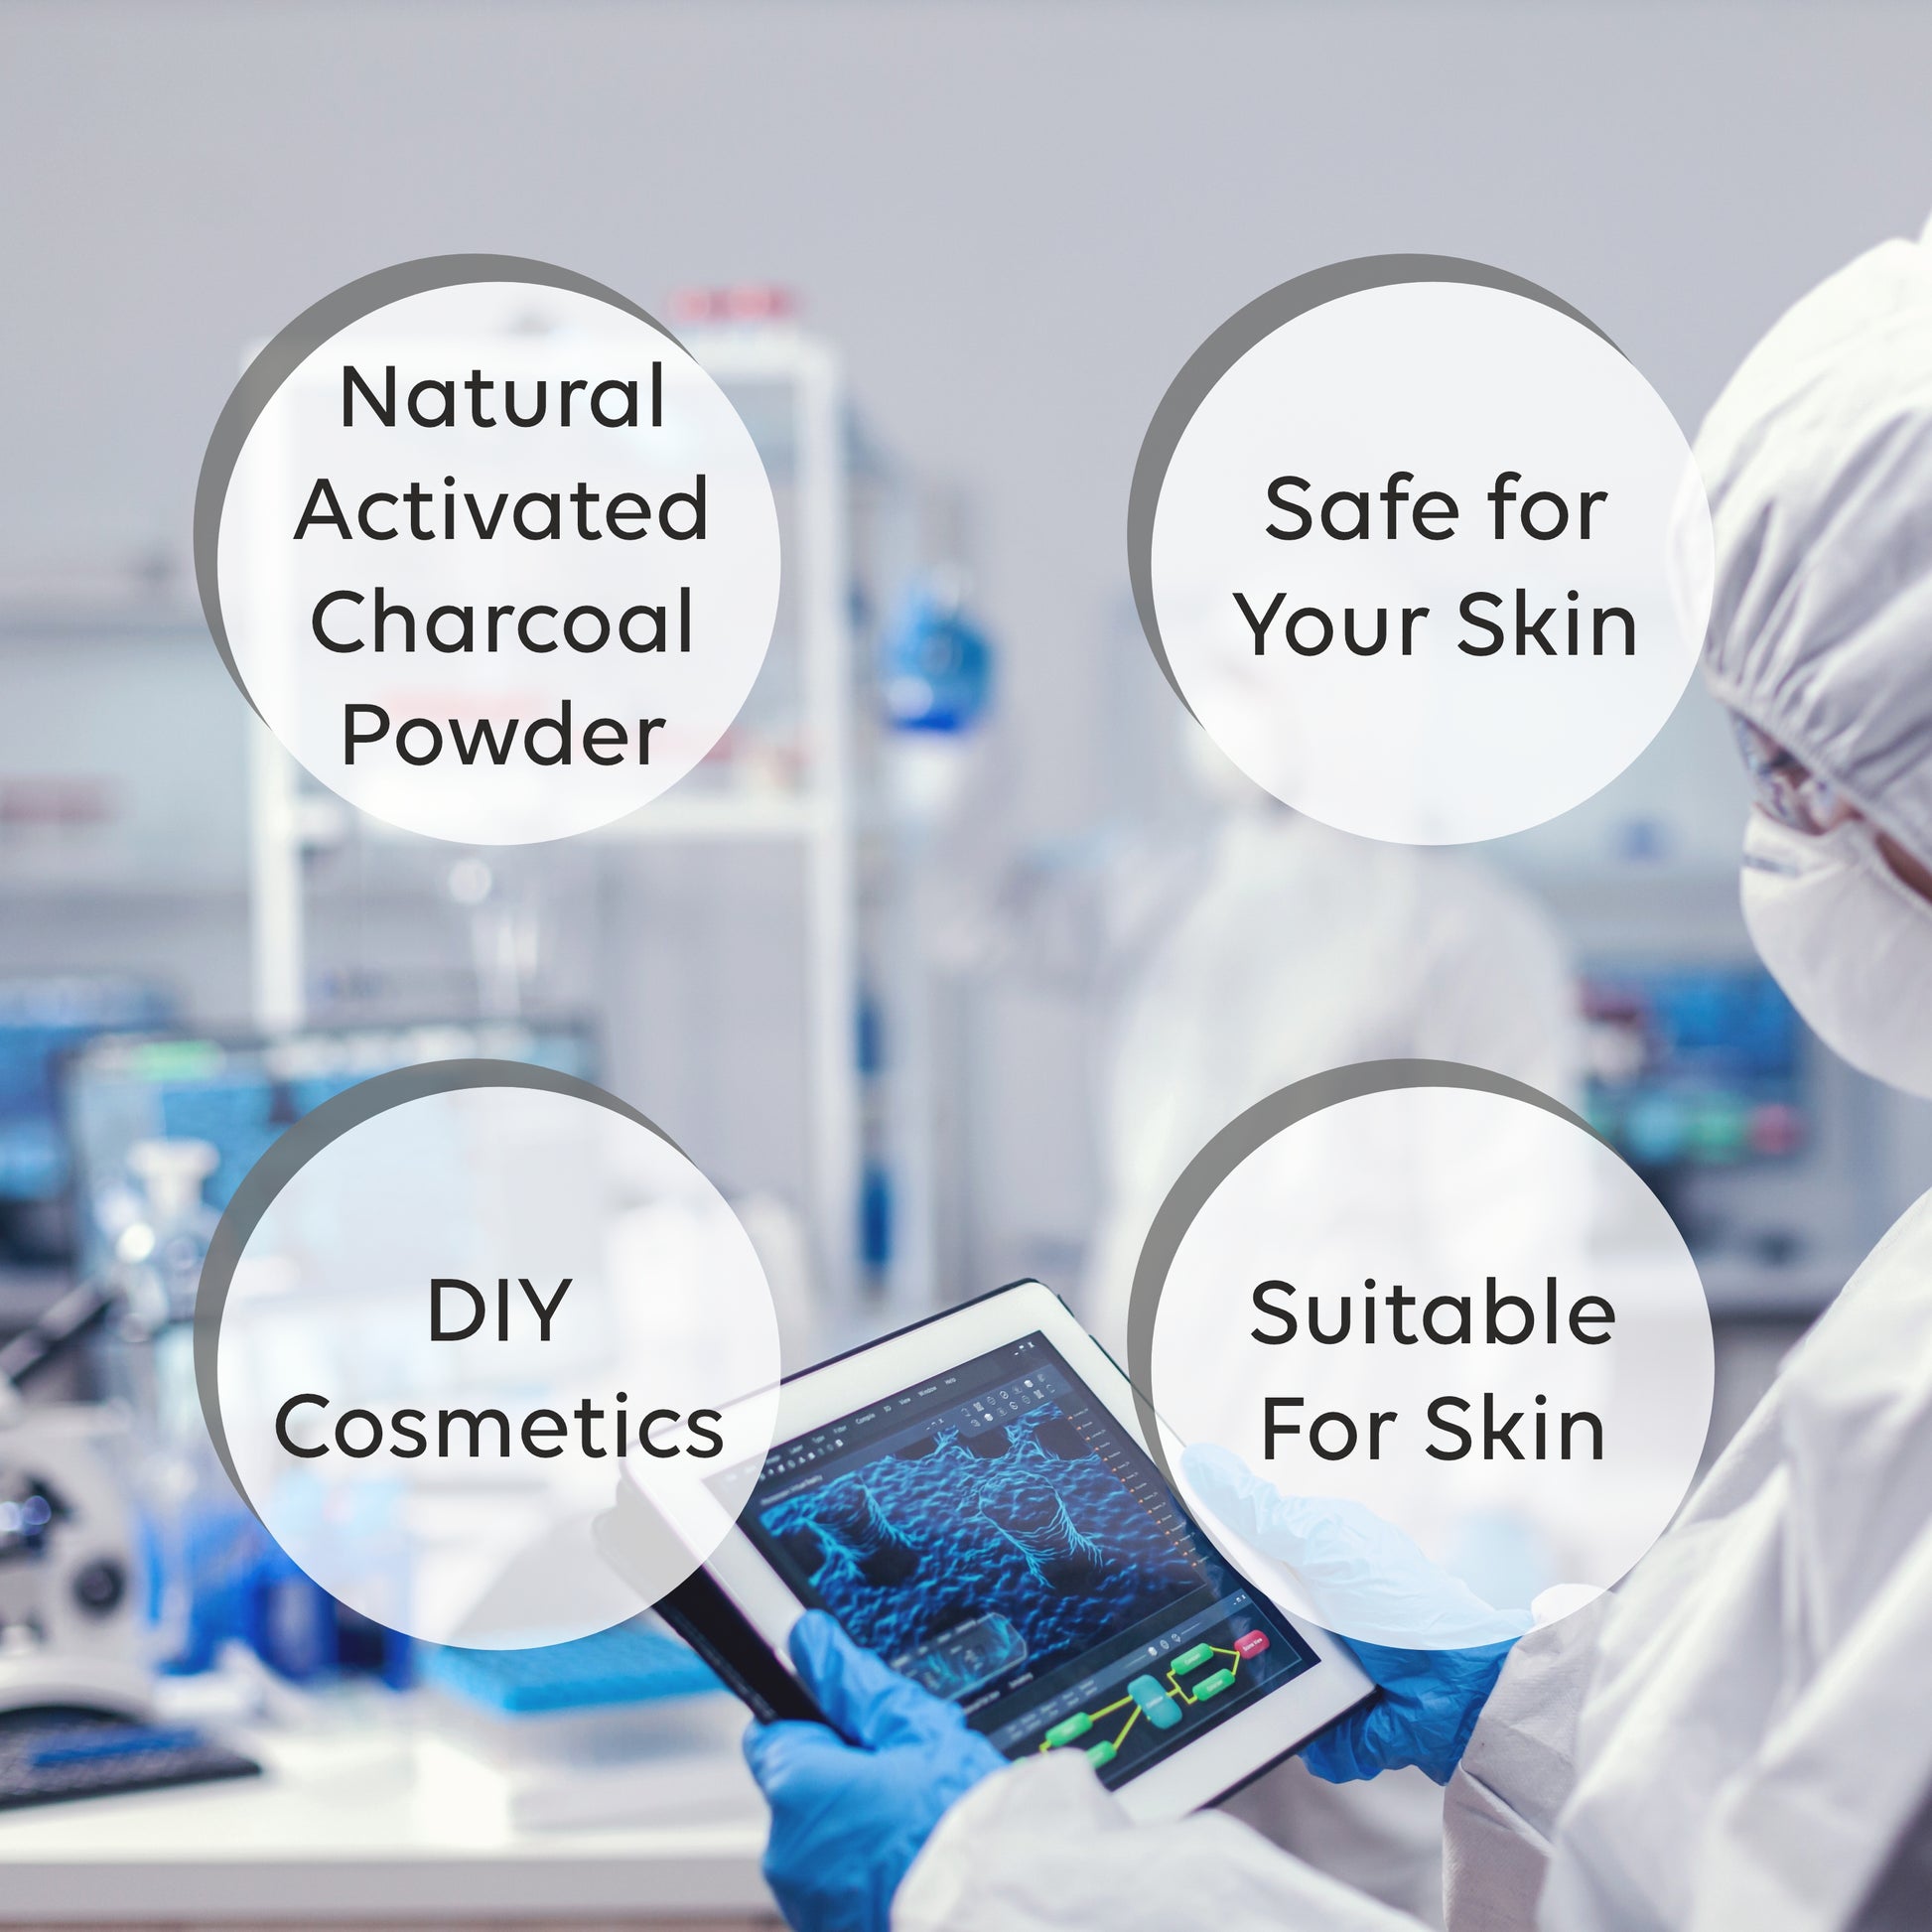 cosmeticmaking, saopmaking, cosmeticmakingingredients, soapmakingingredients,cosmeticingredients,naturalingredients,organicingredients,veganingredients, essentialoils,fragranceoils,carrieroils, carrieroils, butters, clays,botanicals,herbs,preservatives,emulsifiers,surfa ctants,thickeners, thickeners,exfoliants,Activated charcoal